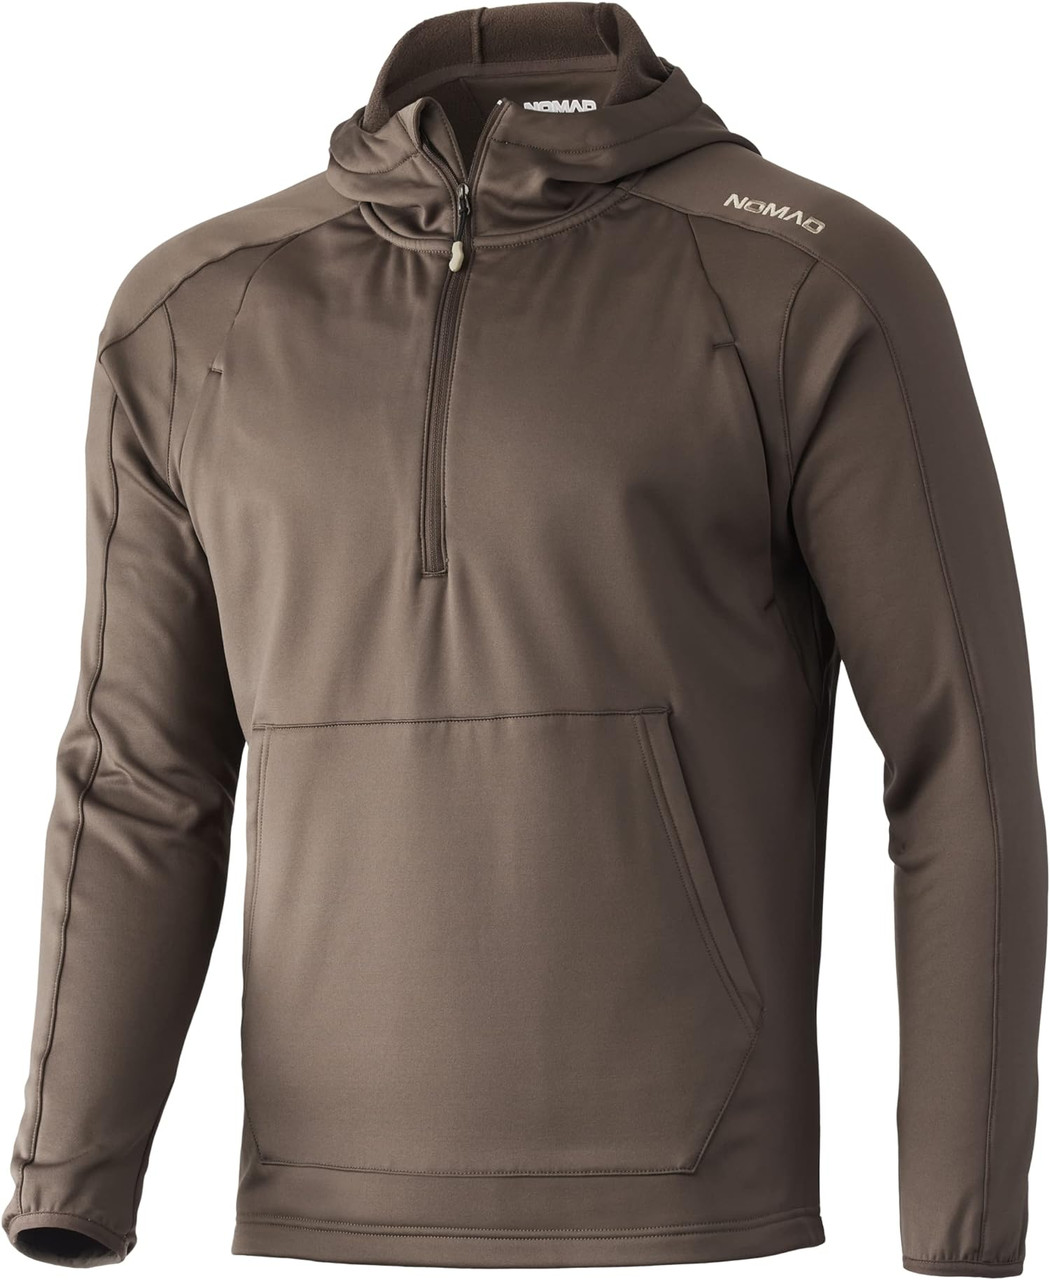 Nomad WPF Hoodie Mid-Weight Water Resistant Hunting Fleece -Mud - 3X-Large